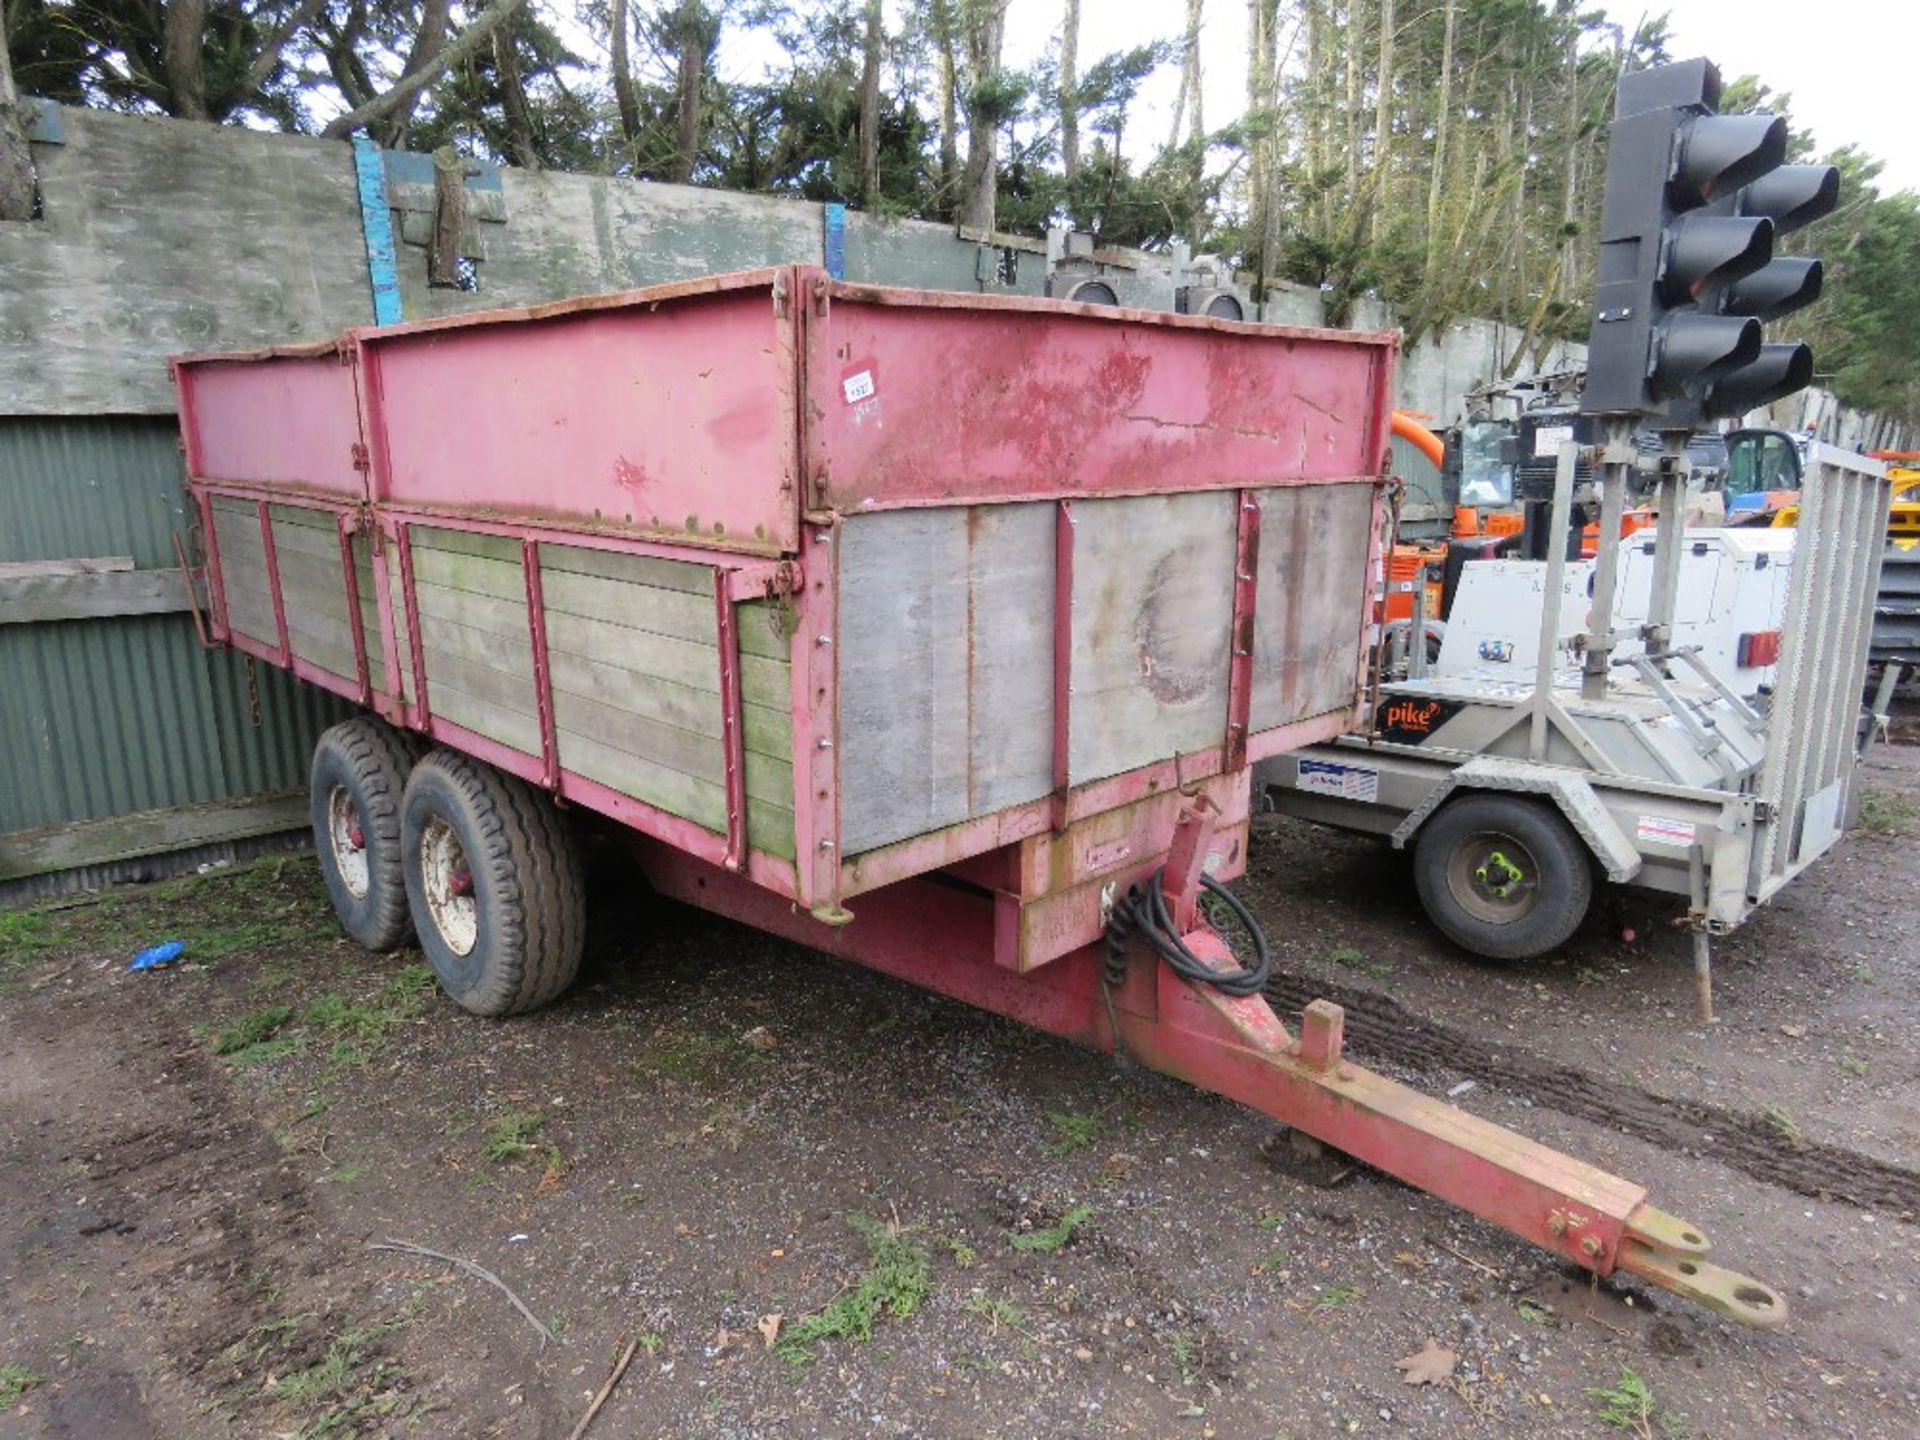 TRACTOR TOWED TWIN AXLED PETTIT GRAIN TIPPING TRAILER, 6 TONNE CAPACITY APPROX. DIRECT FROM LOCAL FA